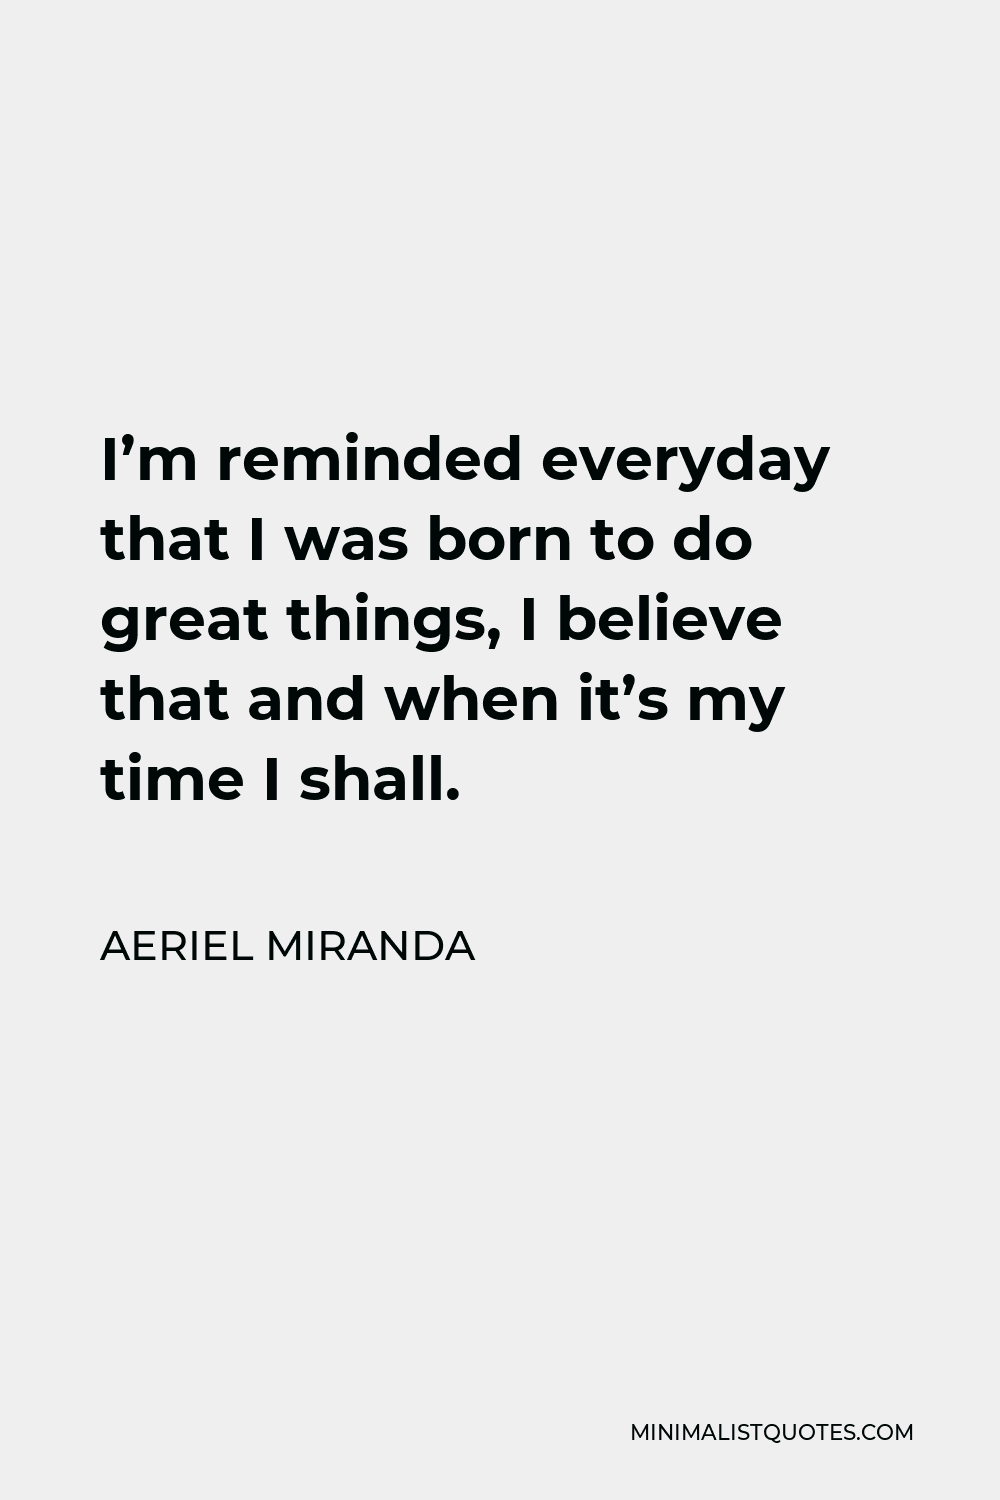 Aeriel Miranda Quote - I’m reminded everyday that I was born to do great things, I believe that and when it’s my time I shall.